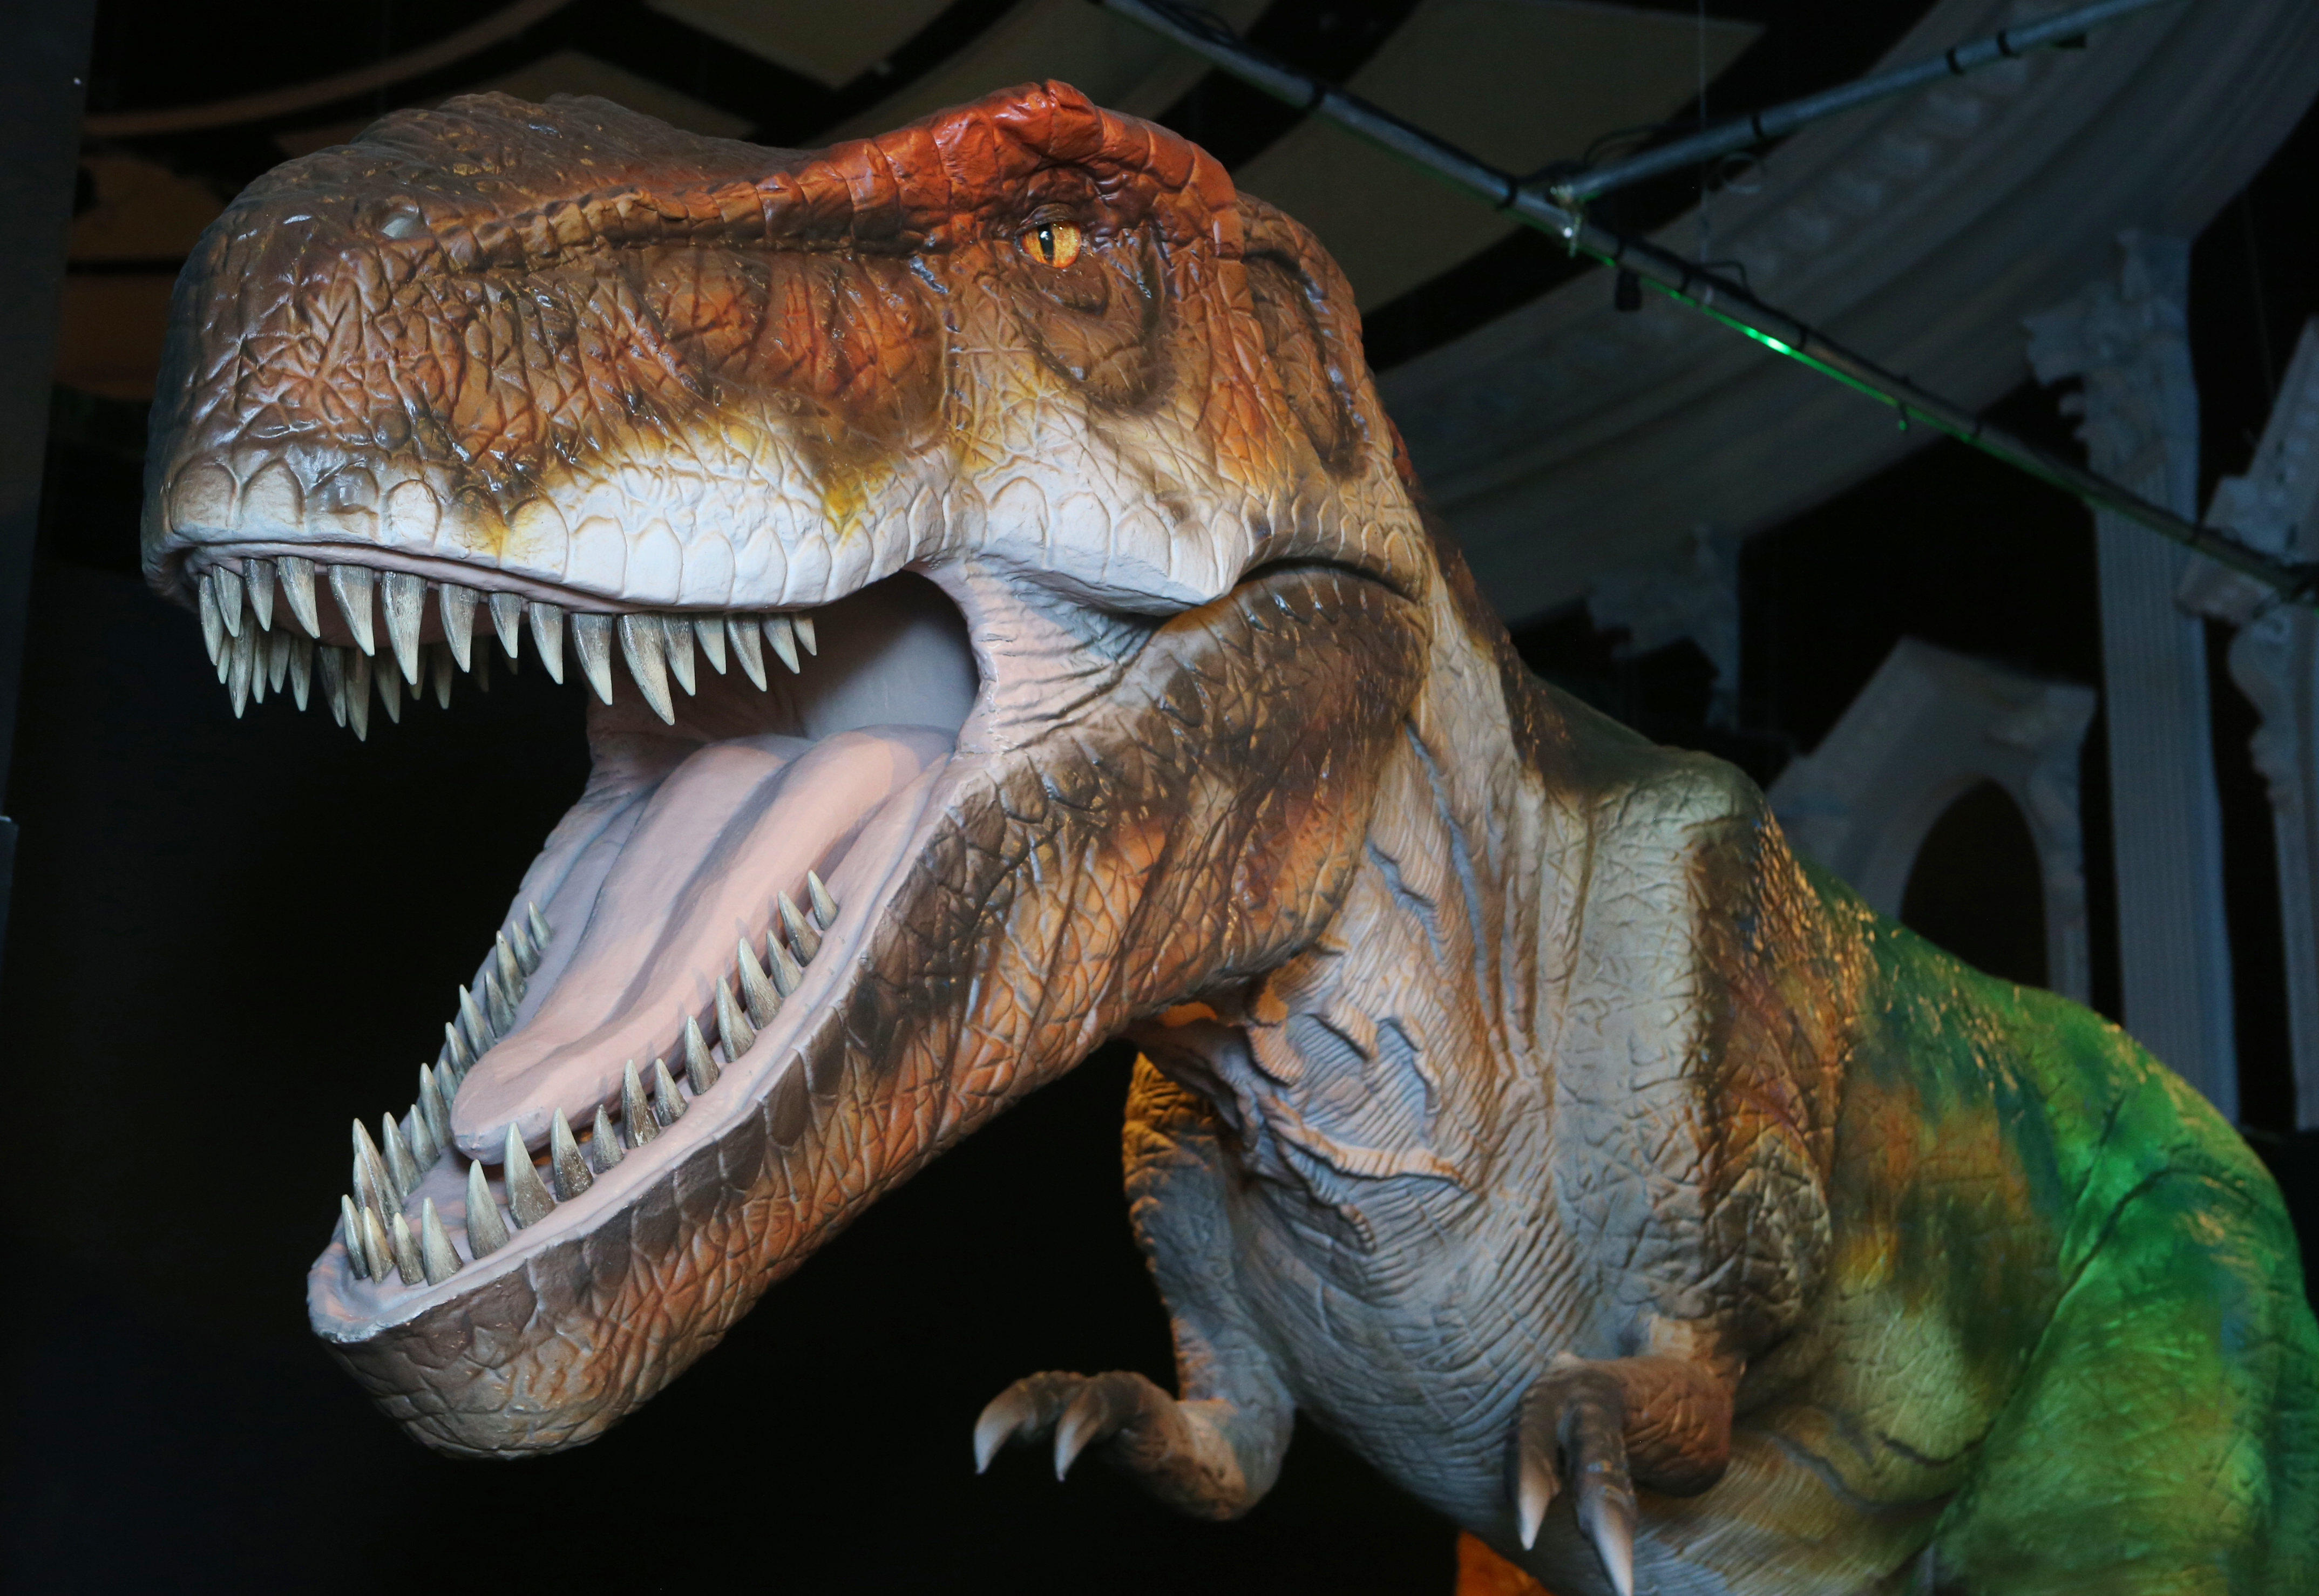 Confirmed: Fossilized T. Rex was expectant mother, Science